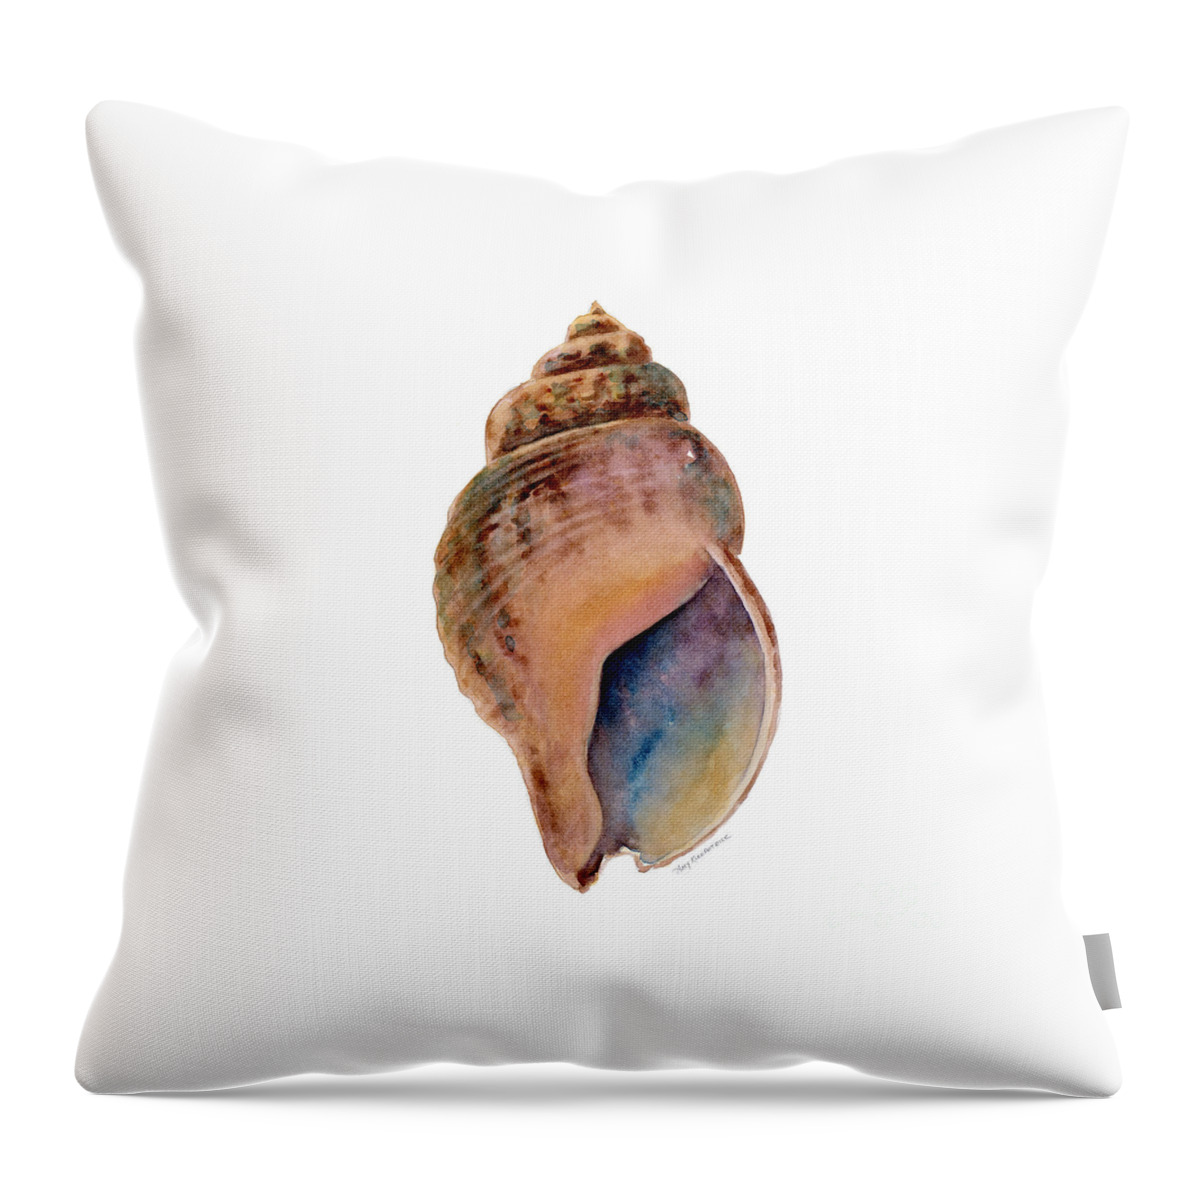 Conch Shell Painting Throw Pillow featuring the painting Common Whelk Shell by Amy Kirkpatrick